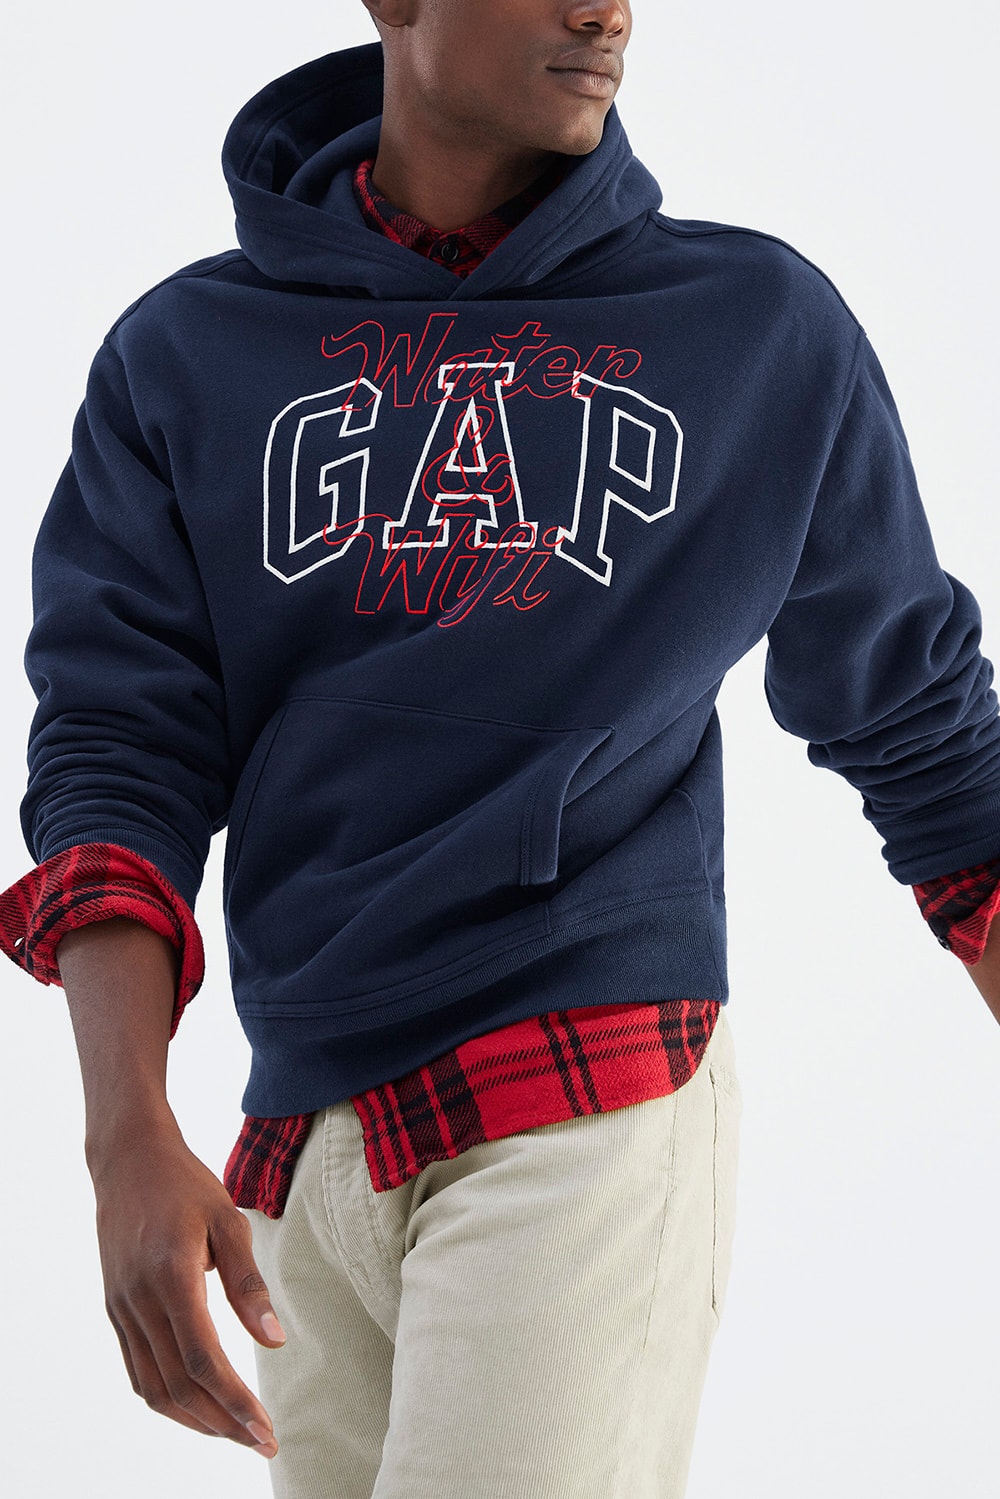 i have been trying aimlessly to find this exact gap hoodie from the social  network : r/findthisshirt